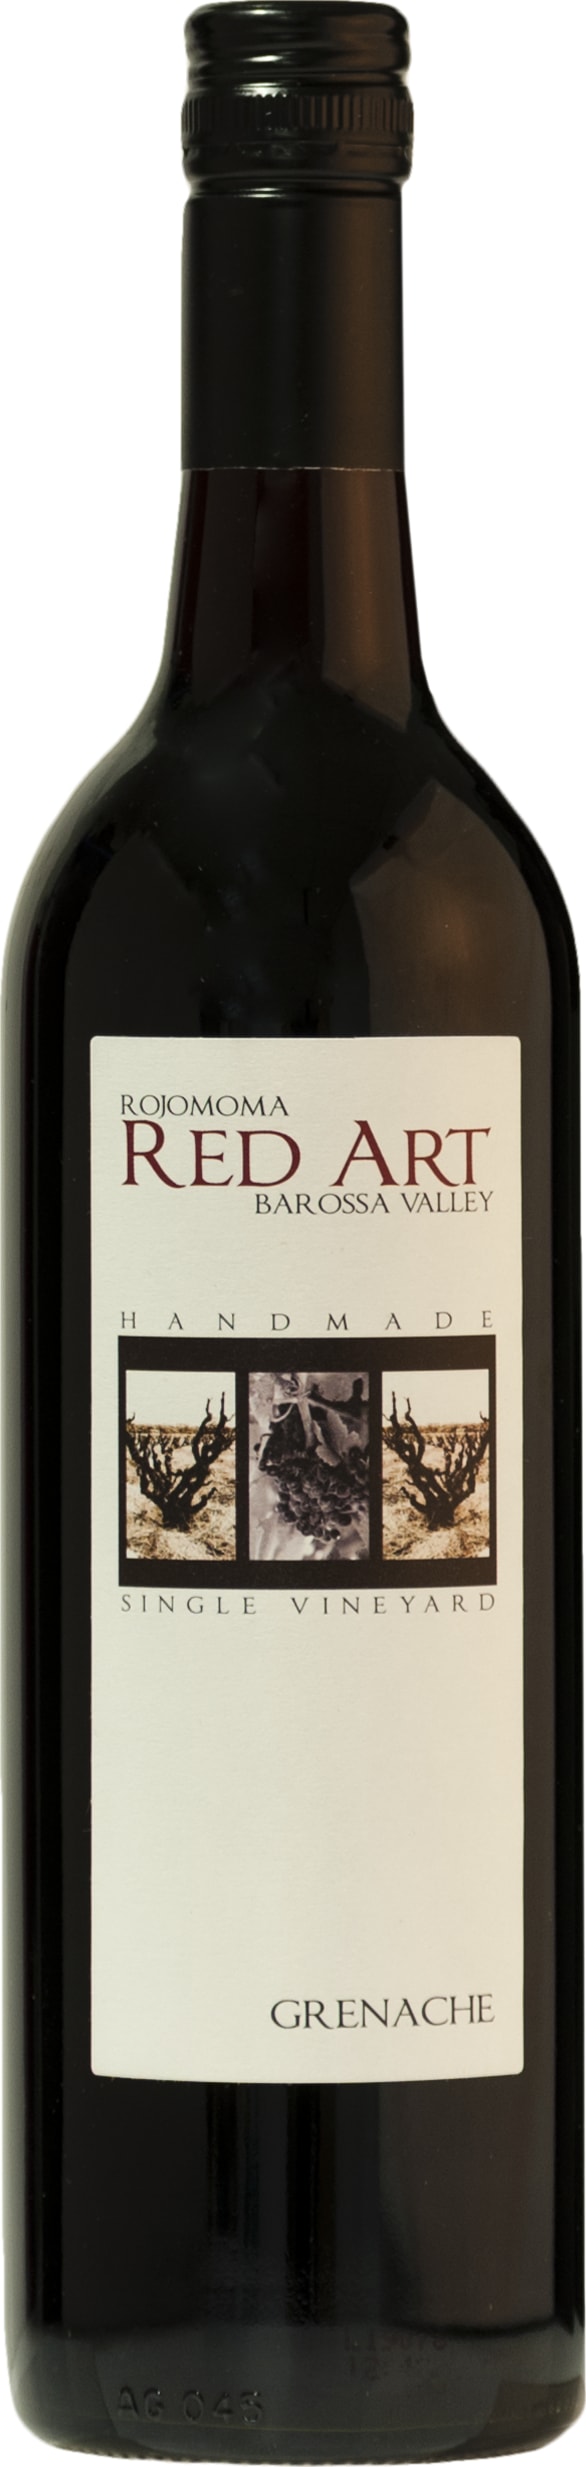 Rojomoma Red Art Grenache 2018 75cl - Buy Rojomoma Wines from GREAT WINES DIRECT wine shop